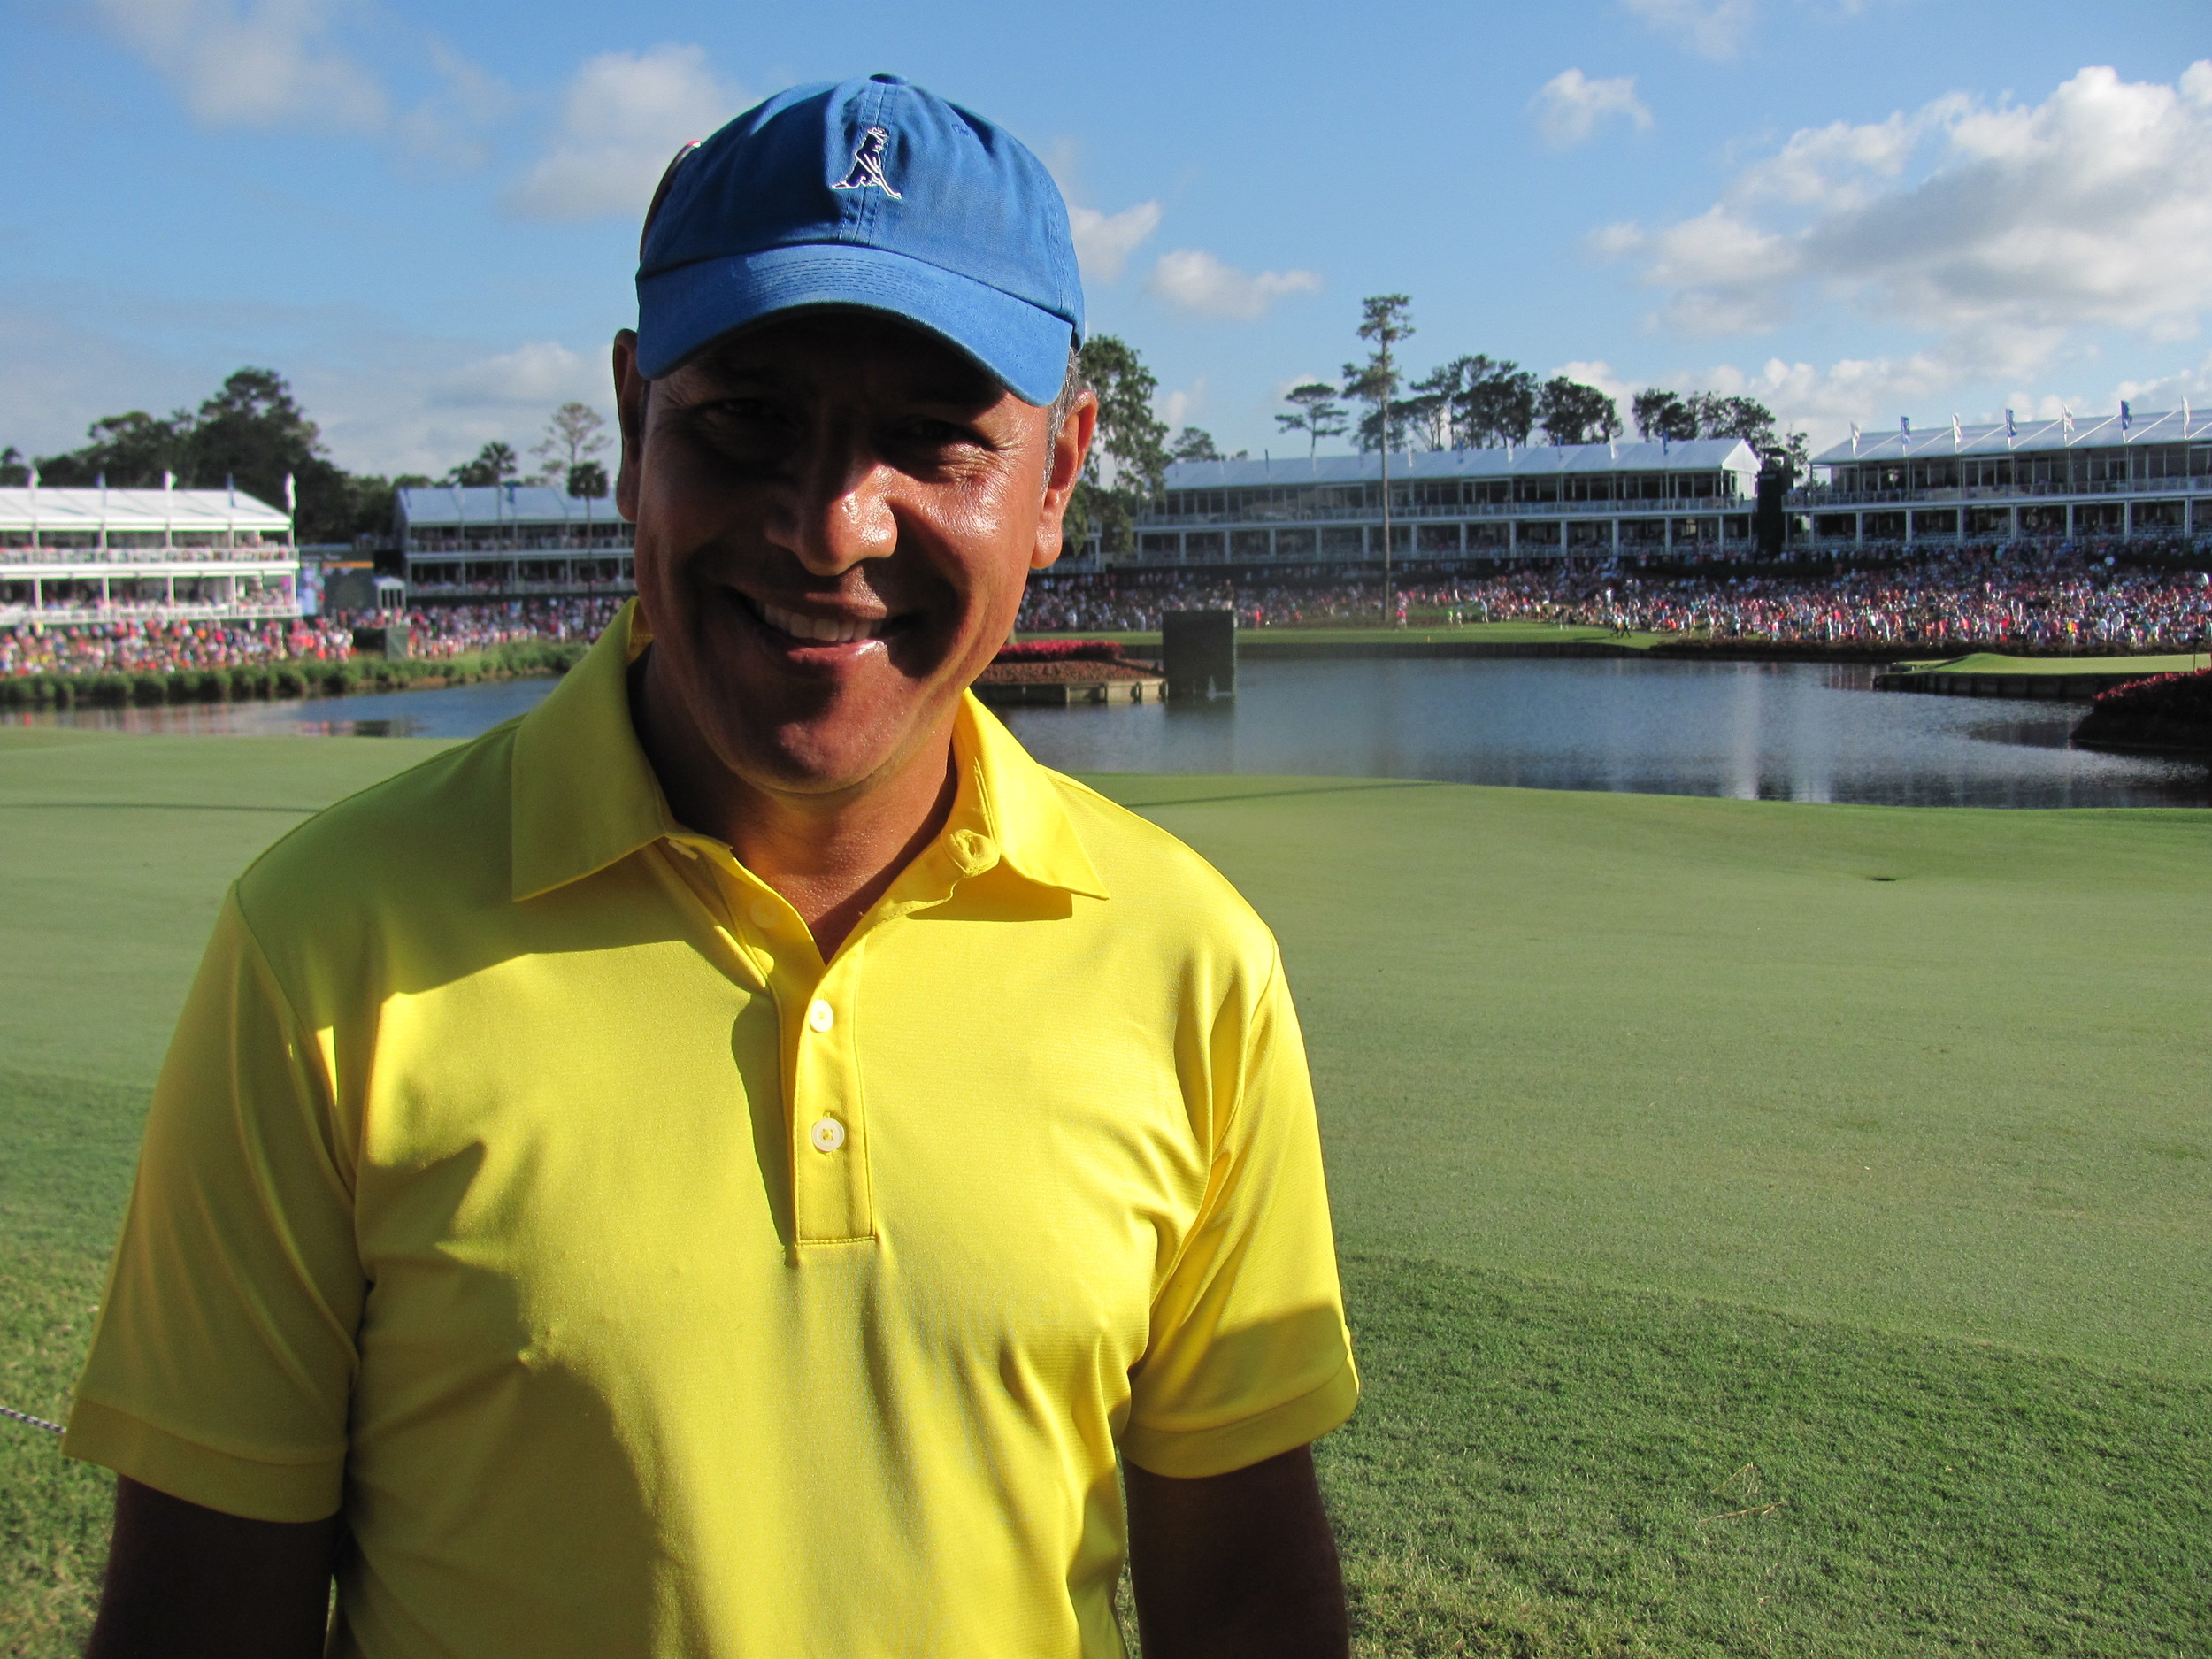 Fan Edgardo Catari of Colombia stands in front of the island green.